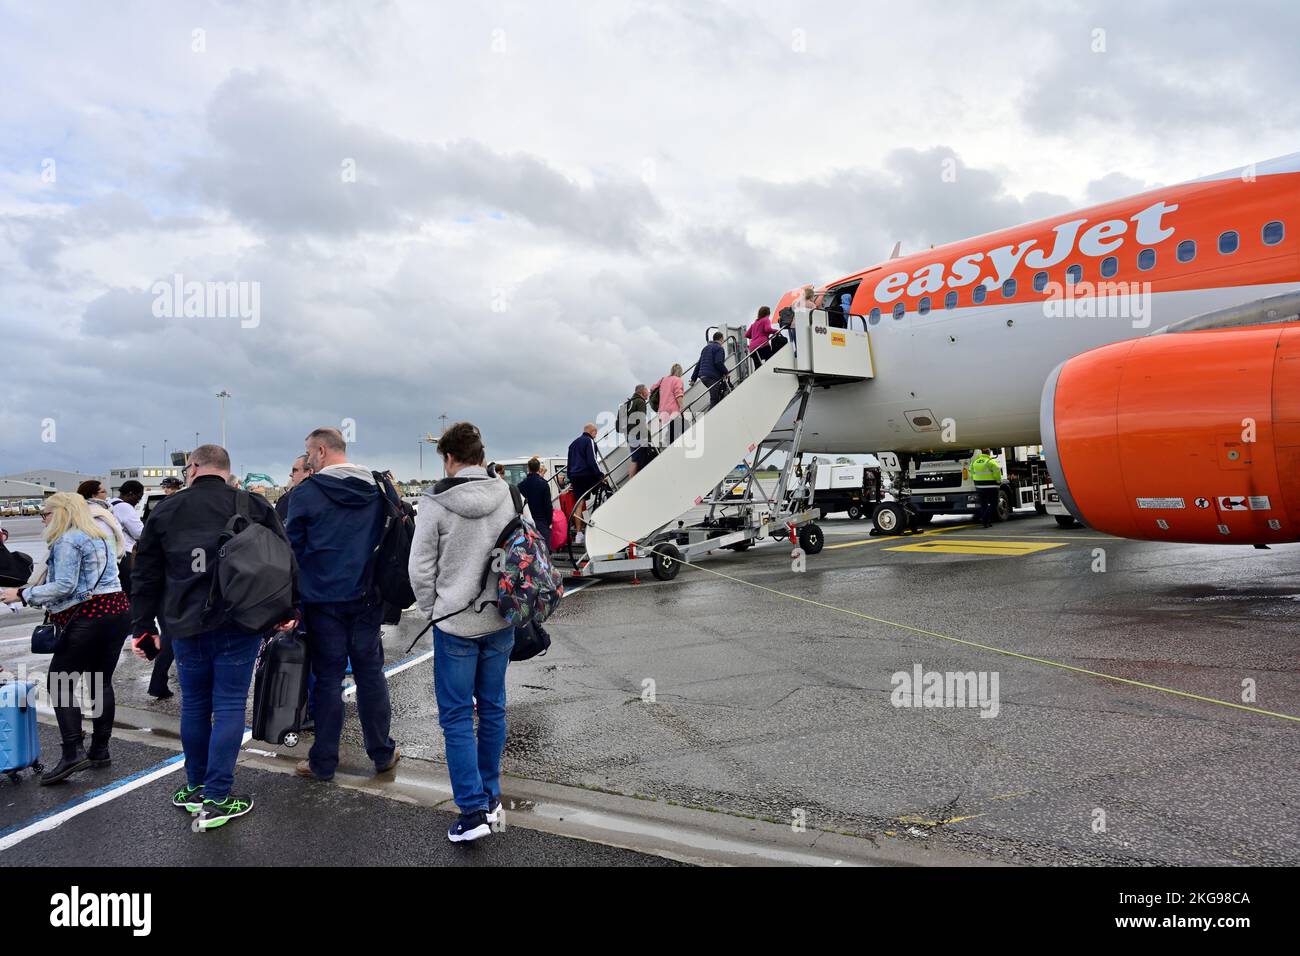 Passengers queueing and boarding EasyJet Airbus aircraft/ airplane by stairs Stock Photo